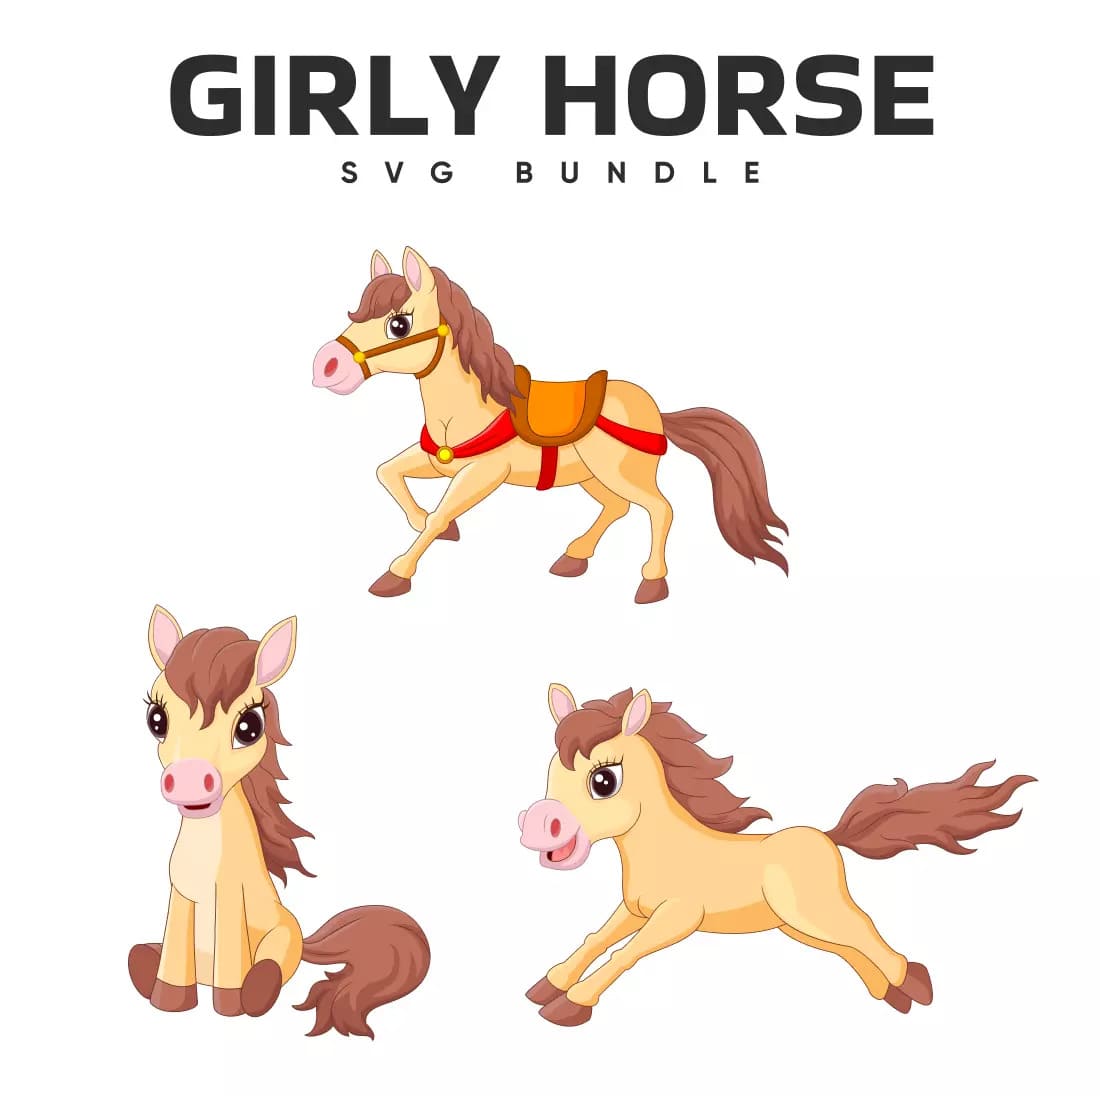 Cartoon horse is shown in three different poses.